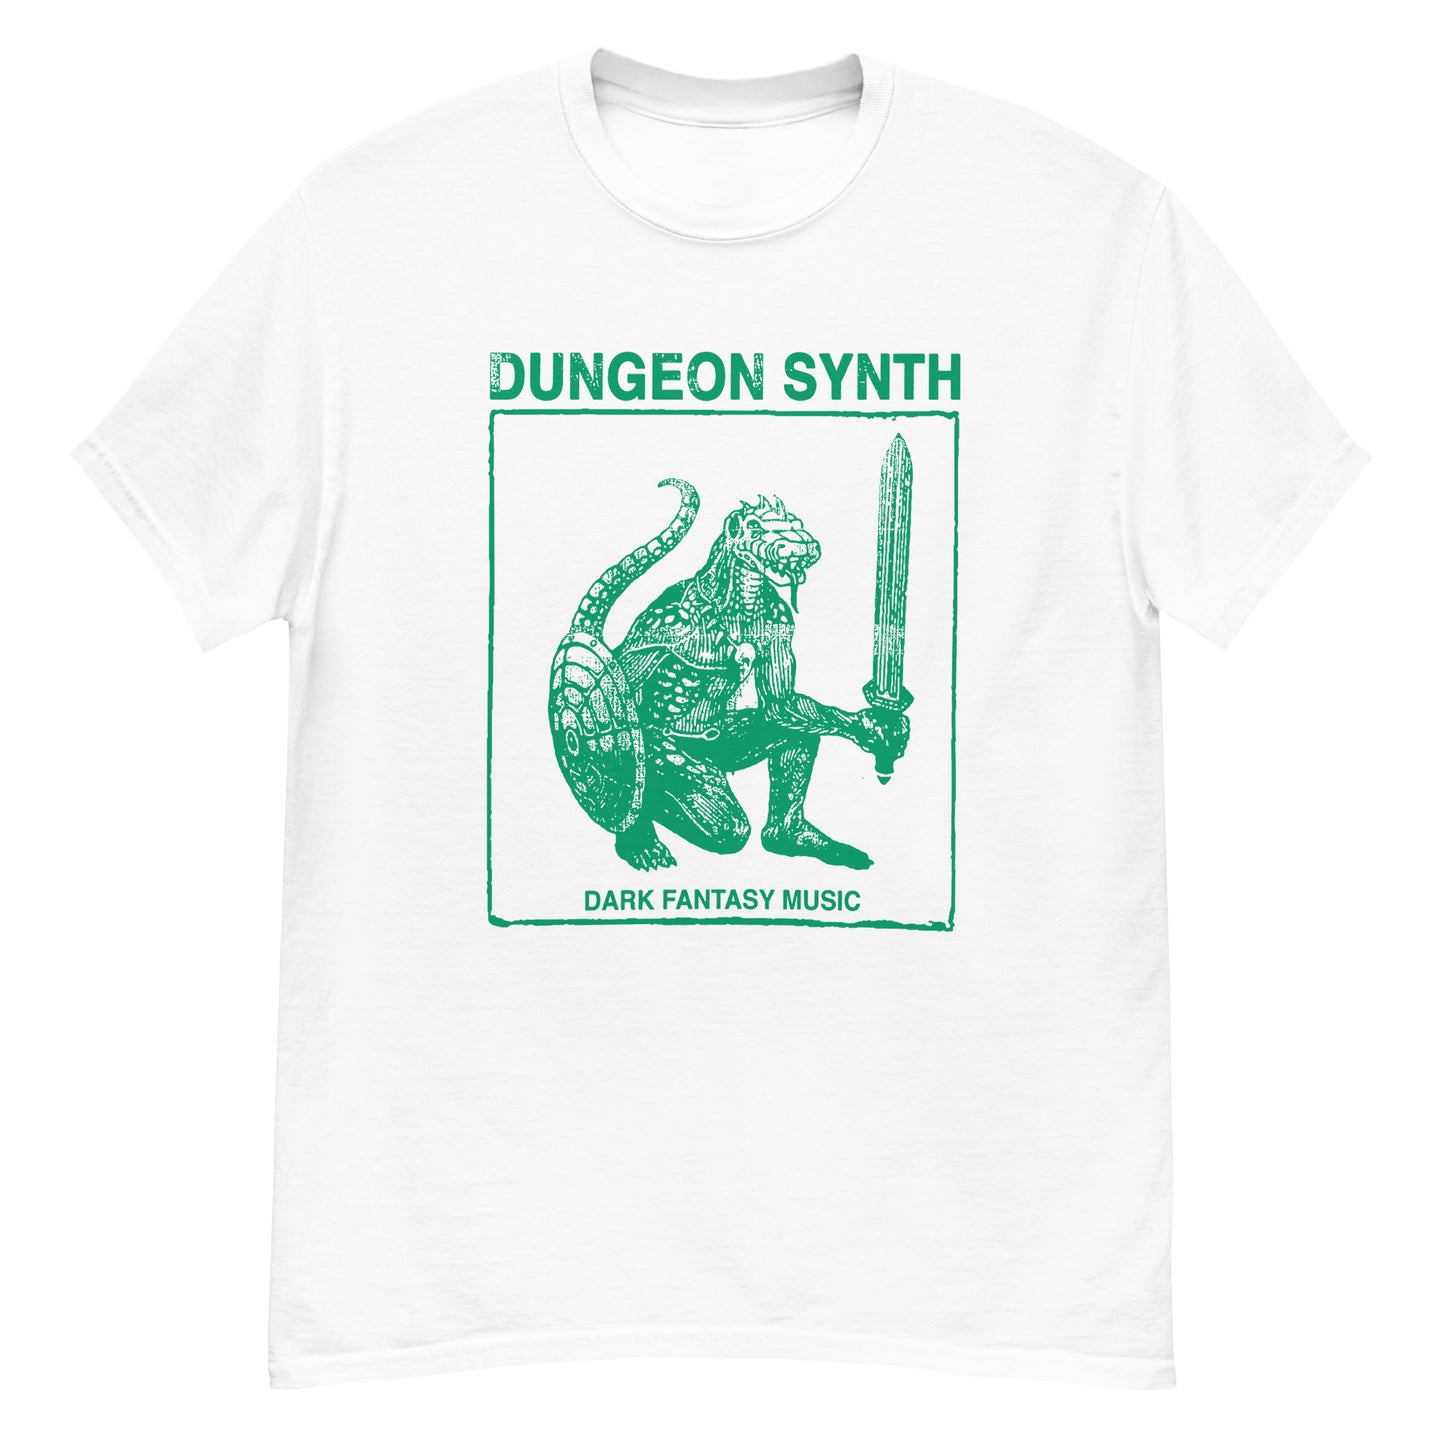 Dungeon Synth T-Shirt